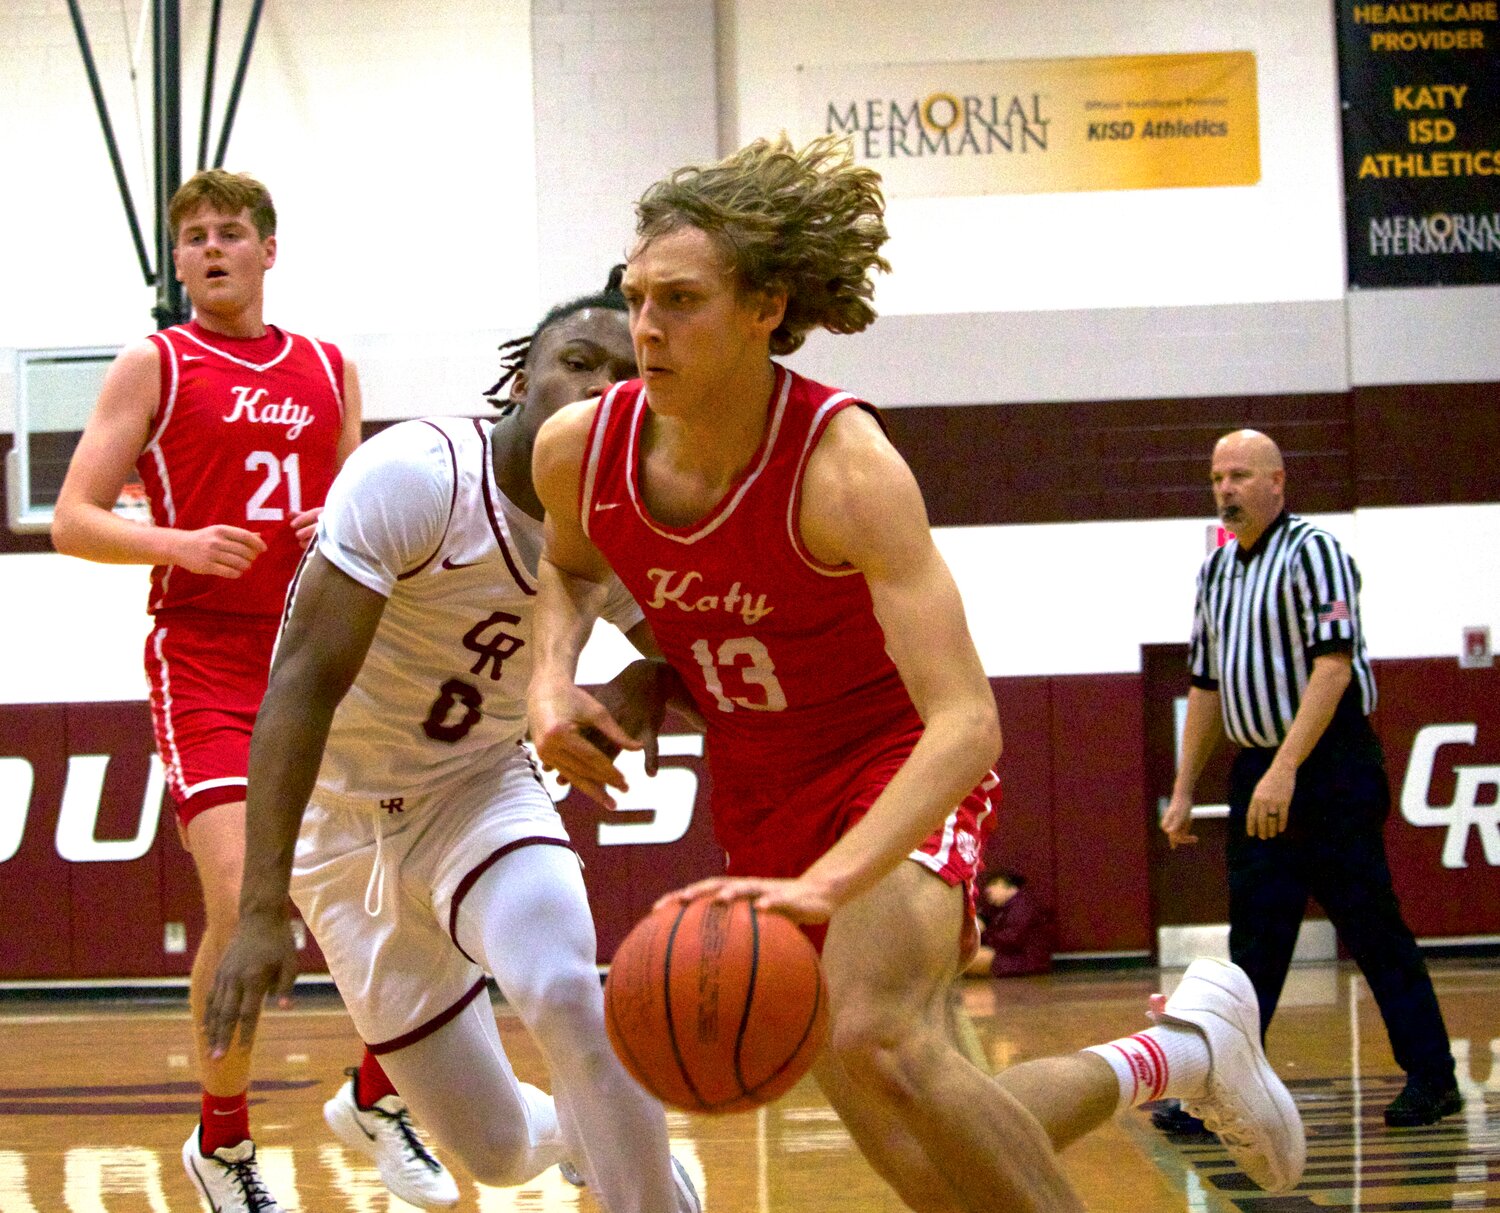 Thomas Belaiter drives to the basket during Wednesday’s game between Katy and Cinco Ranch at the Cinco Ranch gym.